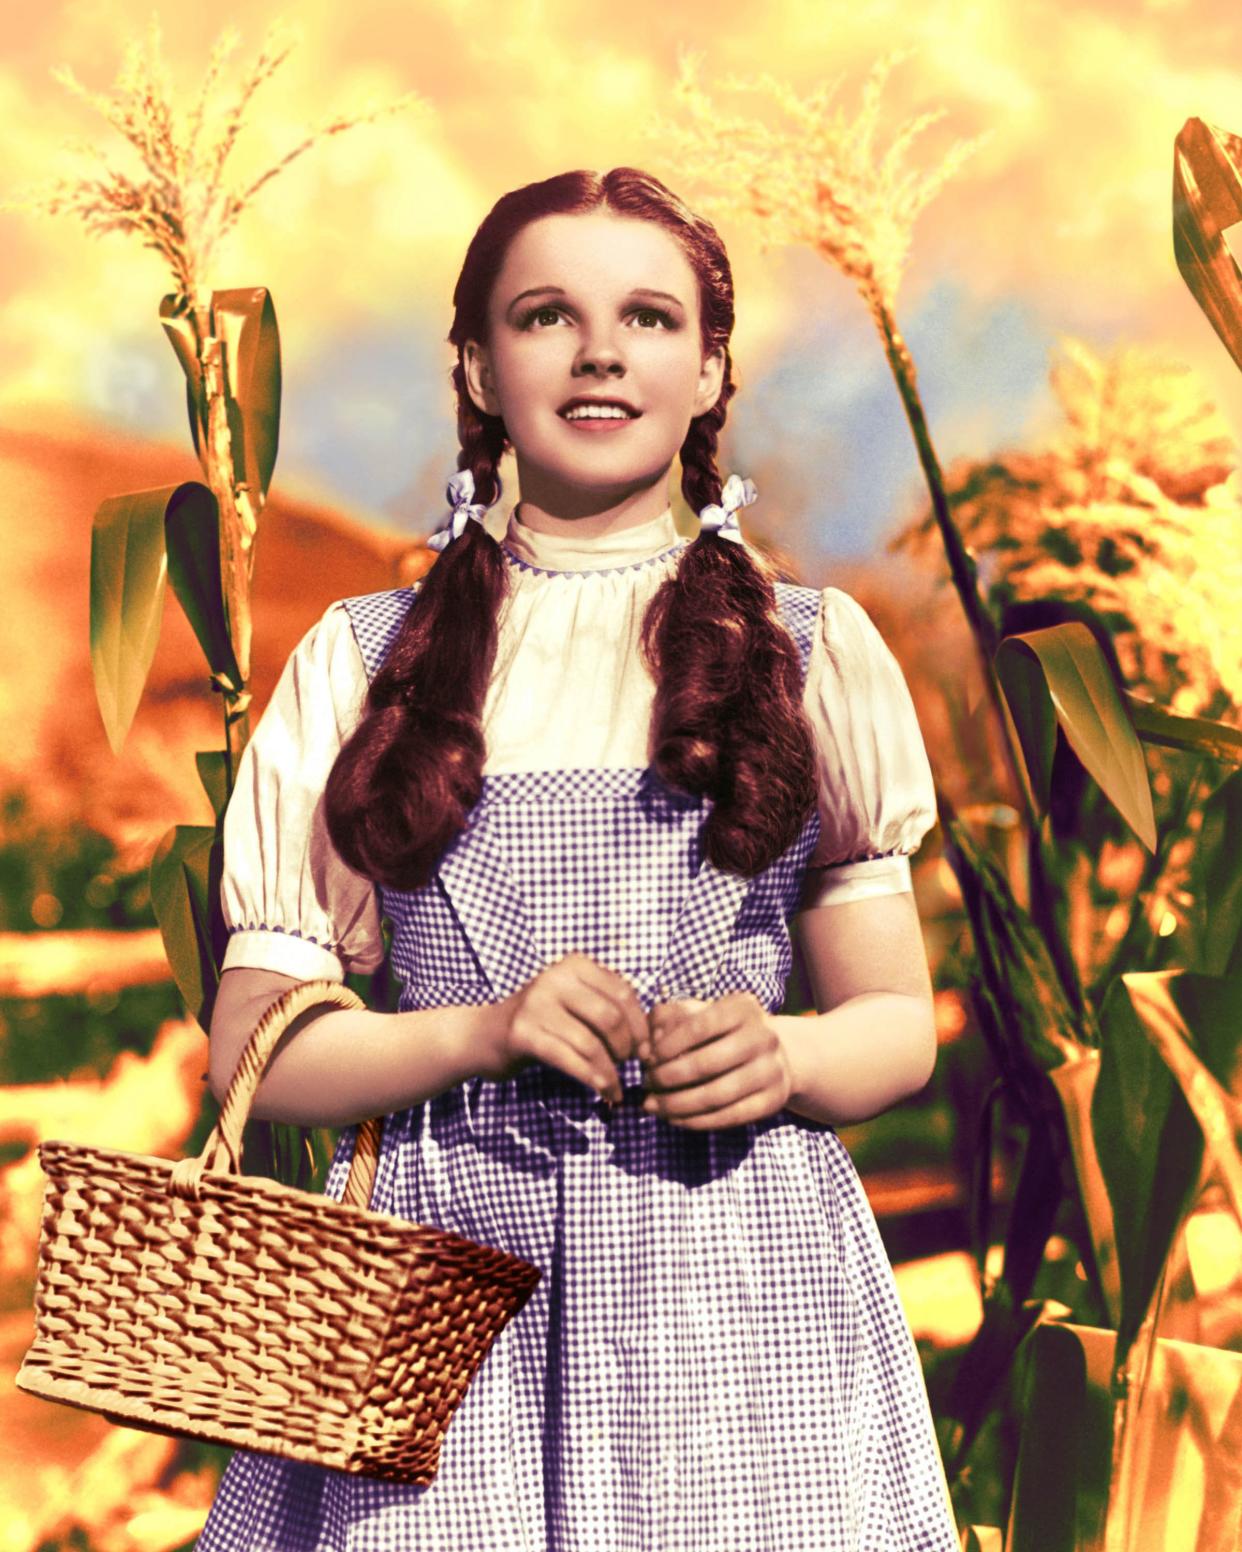 Dorothy's Dress, "The Wizard of Oz"